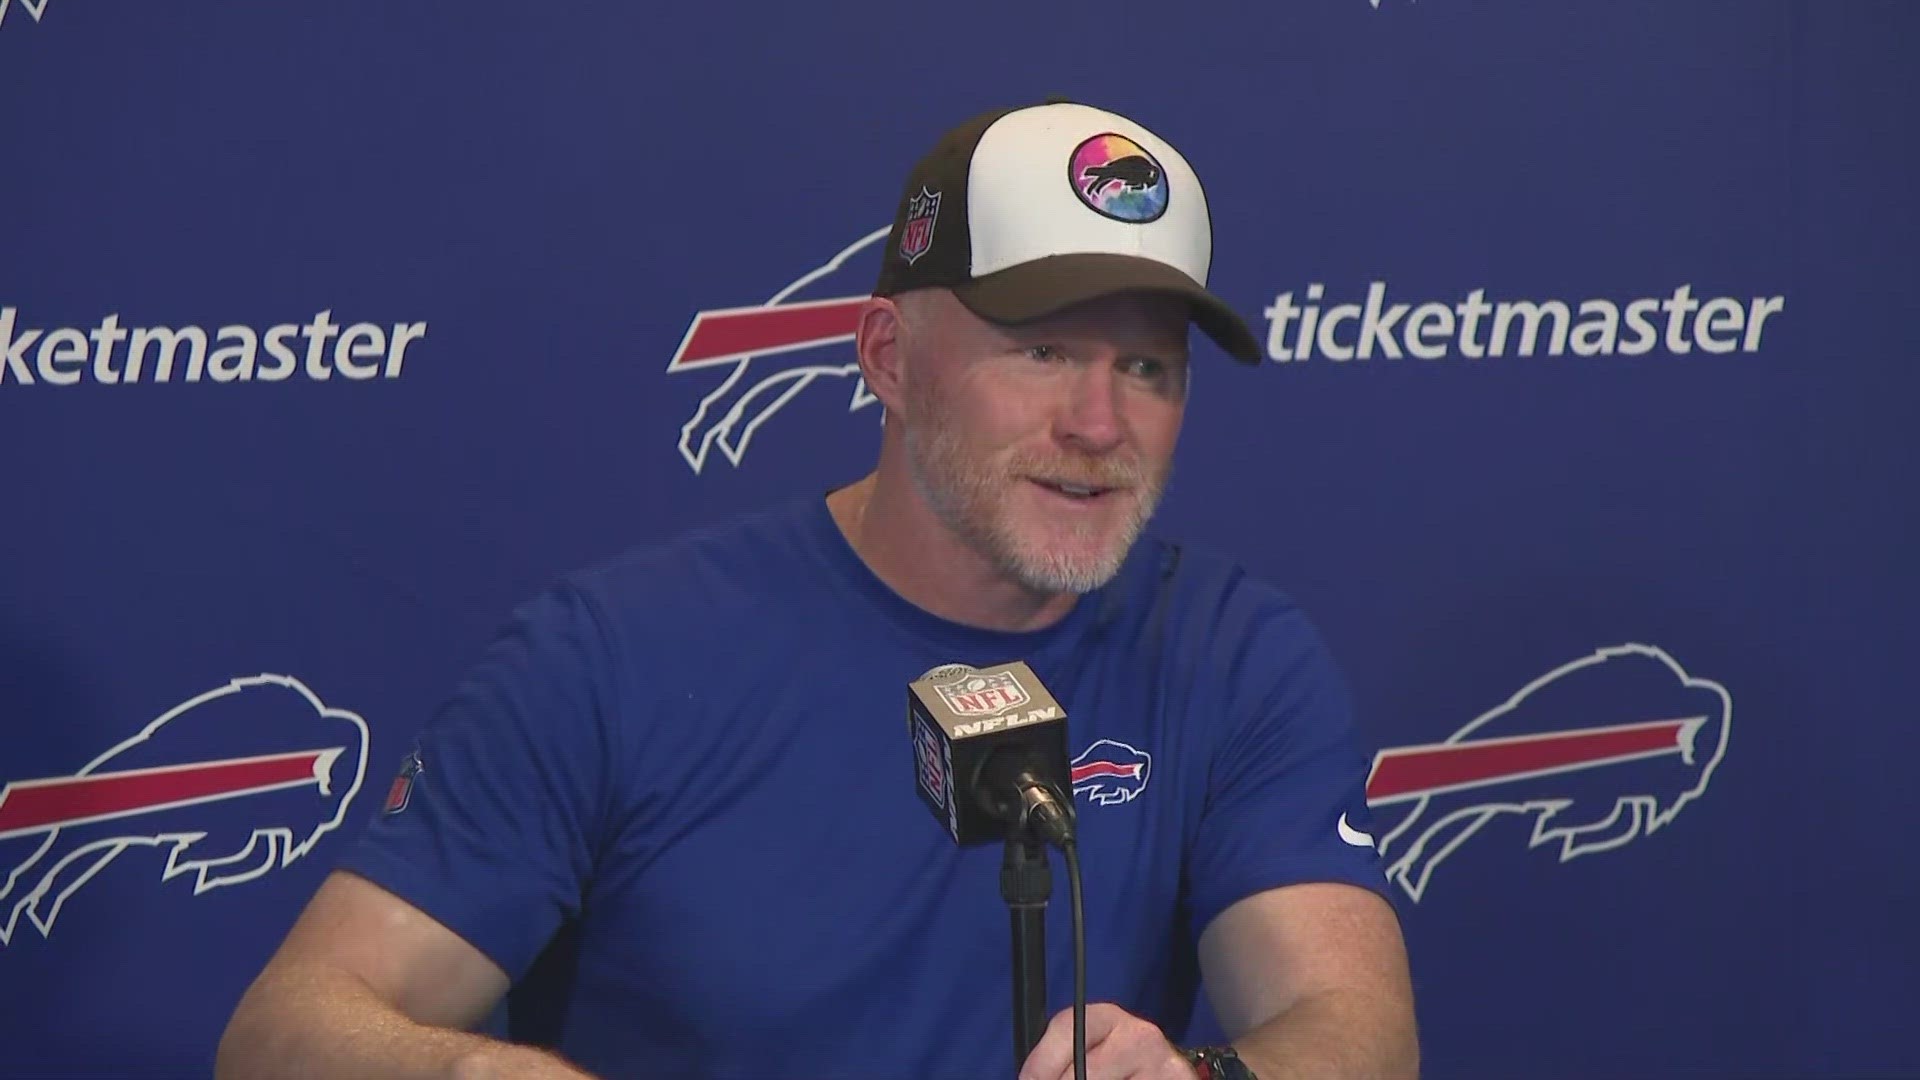 Bills news conference: Coach Sean McDermott talks ahead of Sunday's prime-time game against the New York Giants.